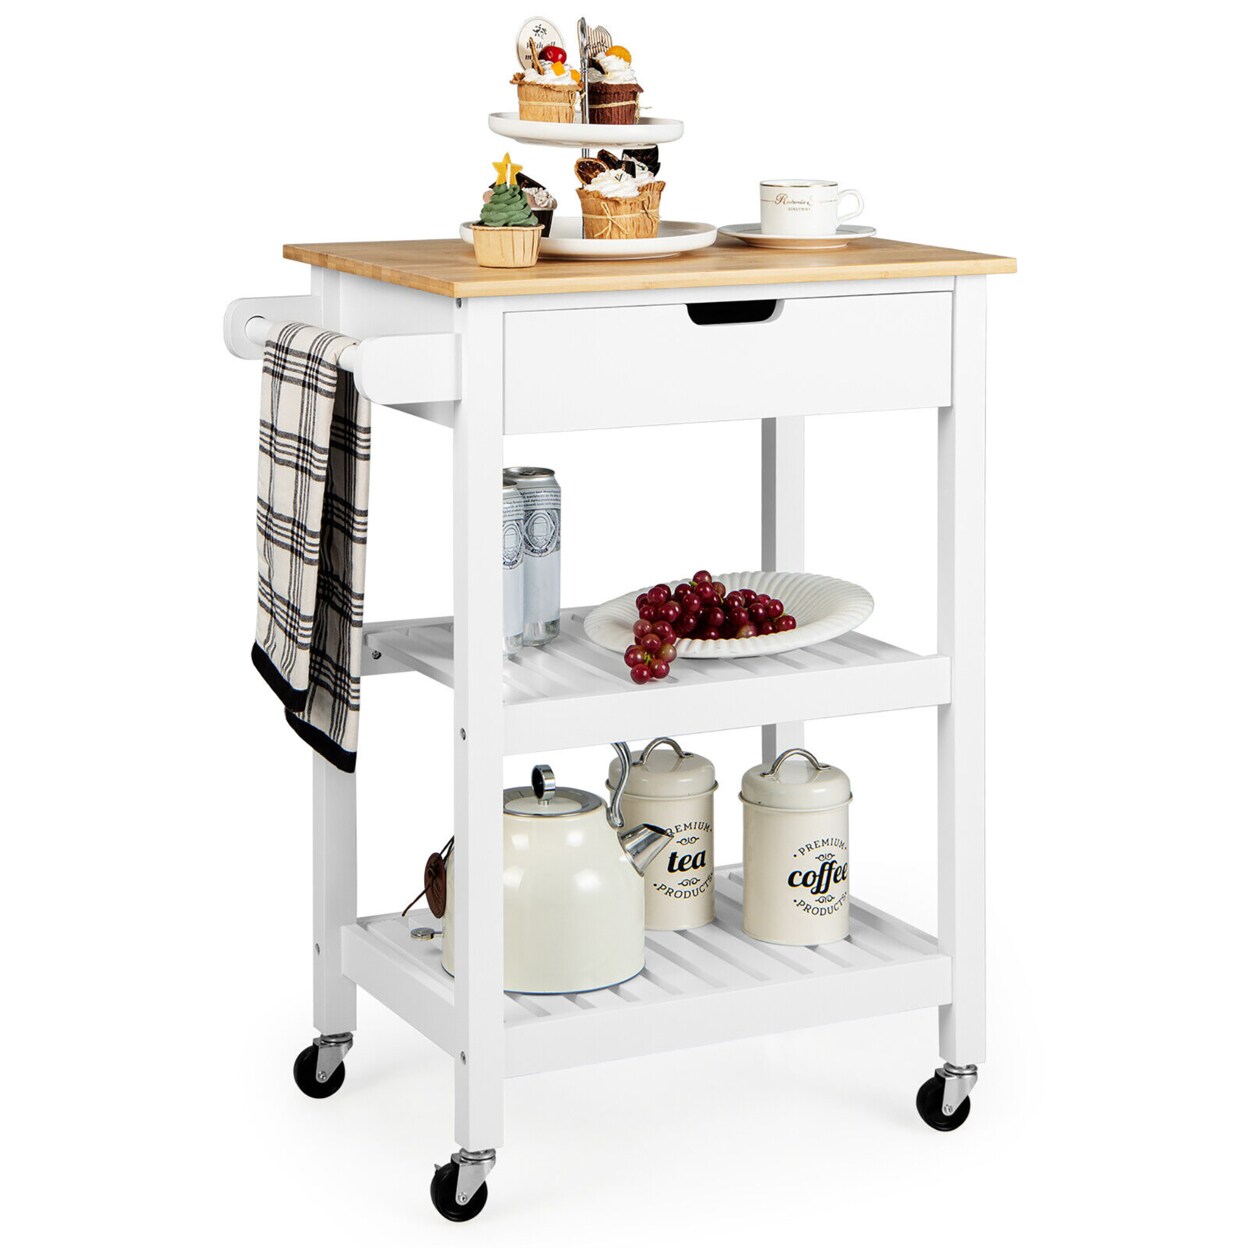 Gymax 3-Tier Kitchen Island Cart Rolling Service Trolley w/ Bamboo Top Shelves